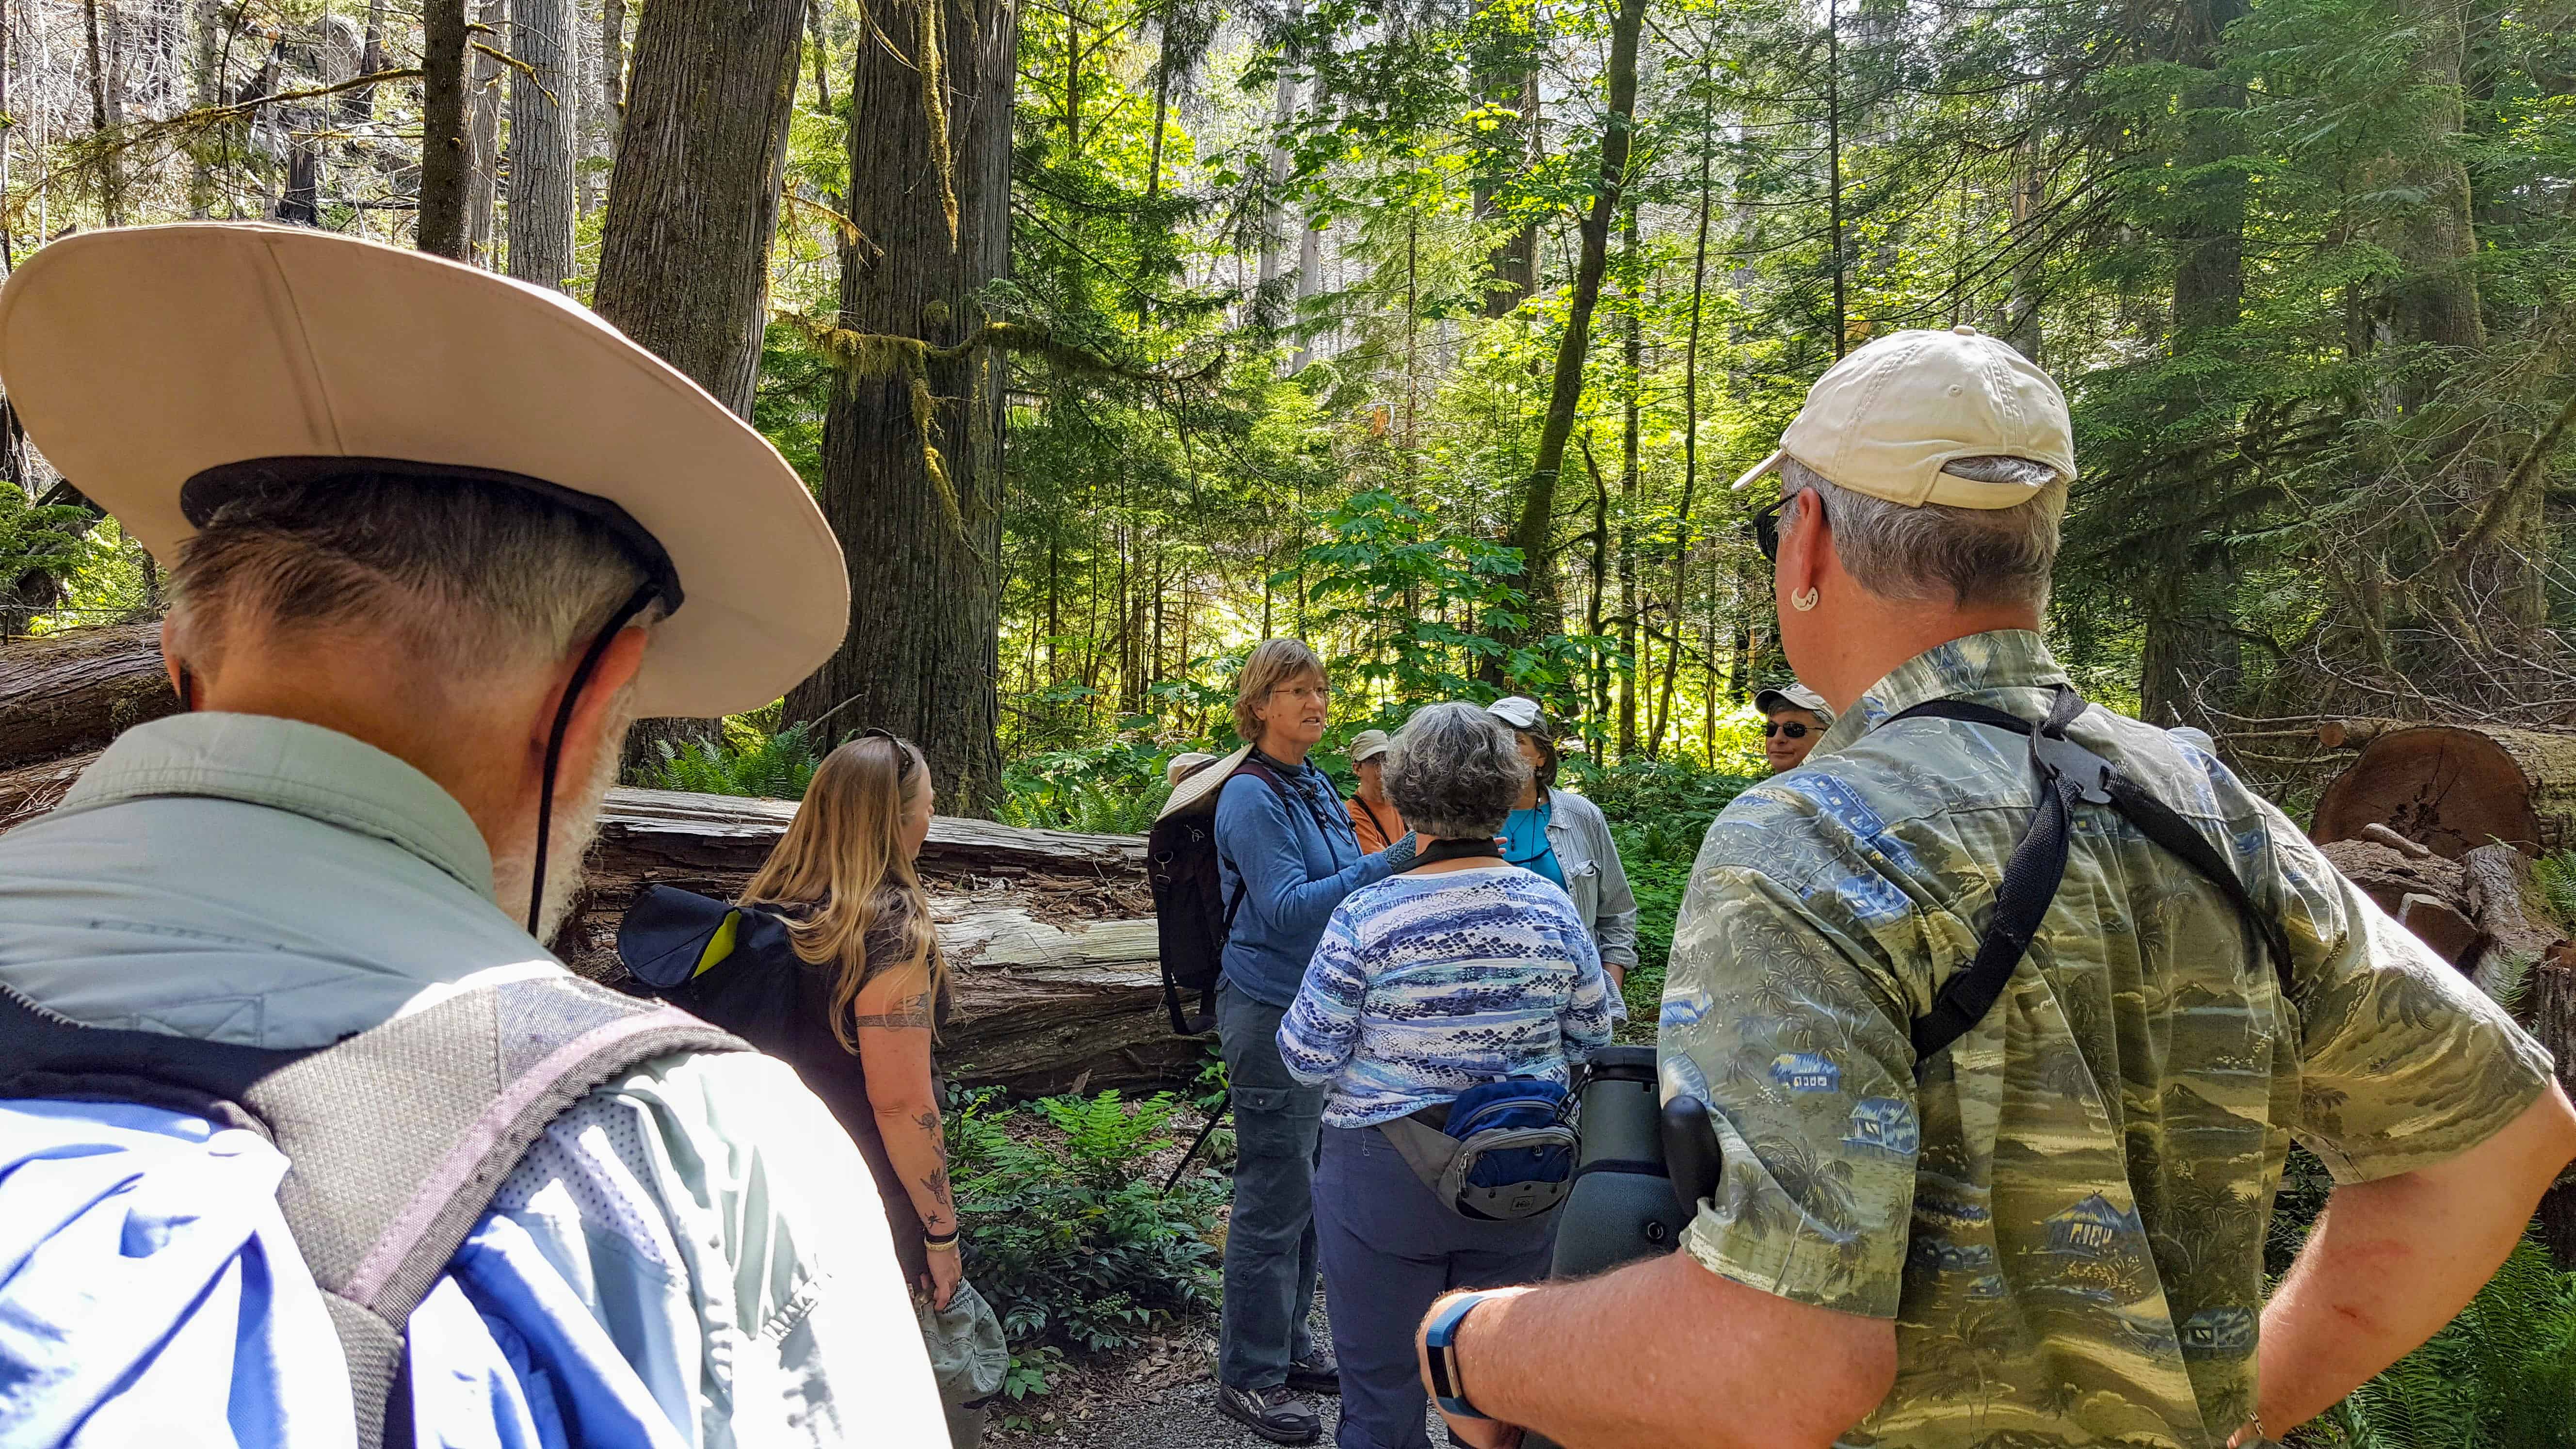 Adult participants watch instructor Libby Mills as she teaches abour birding in a forest